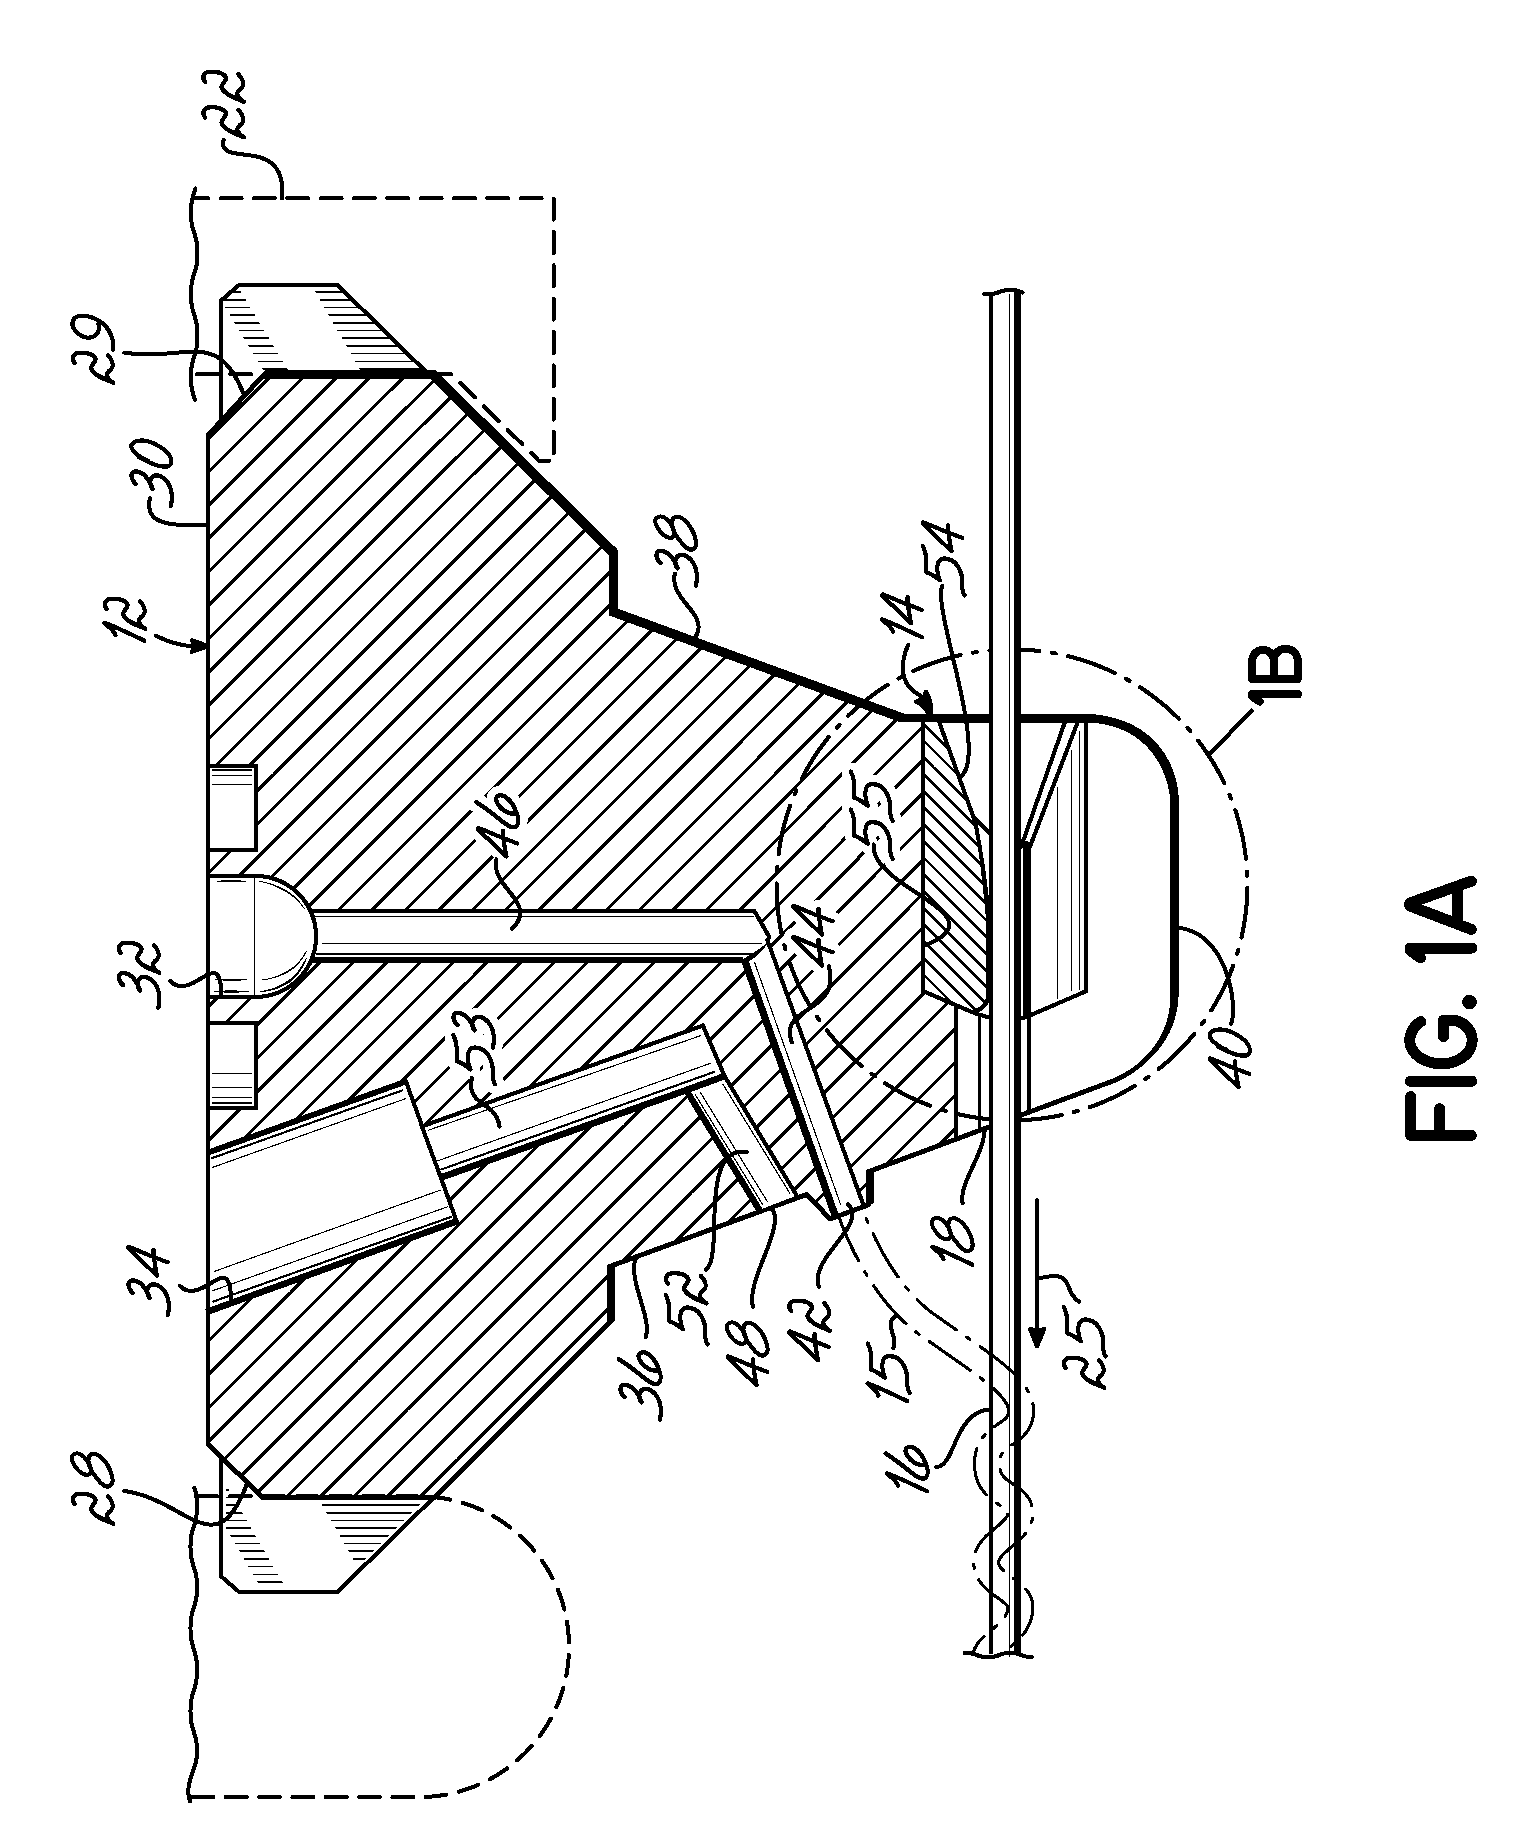 Protective member and nozzle assembly configured to resist wear